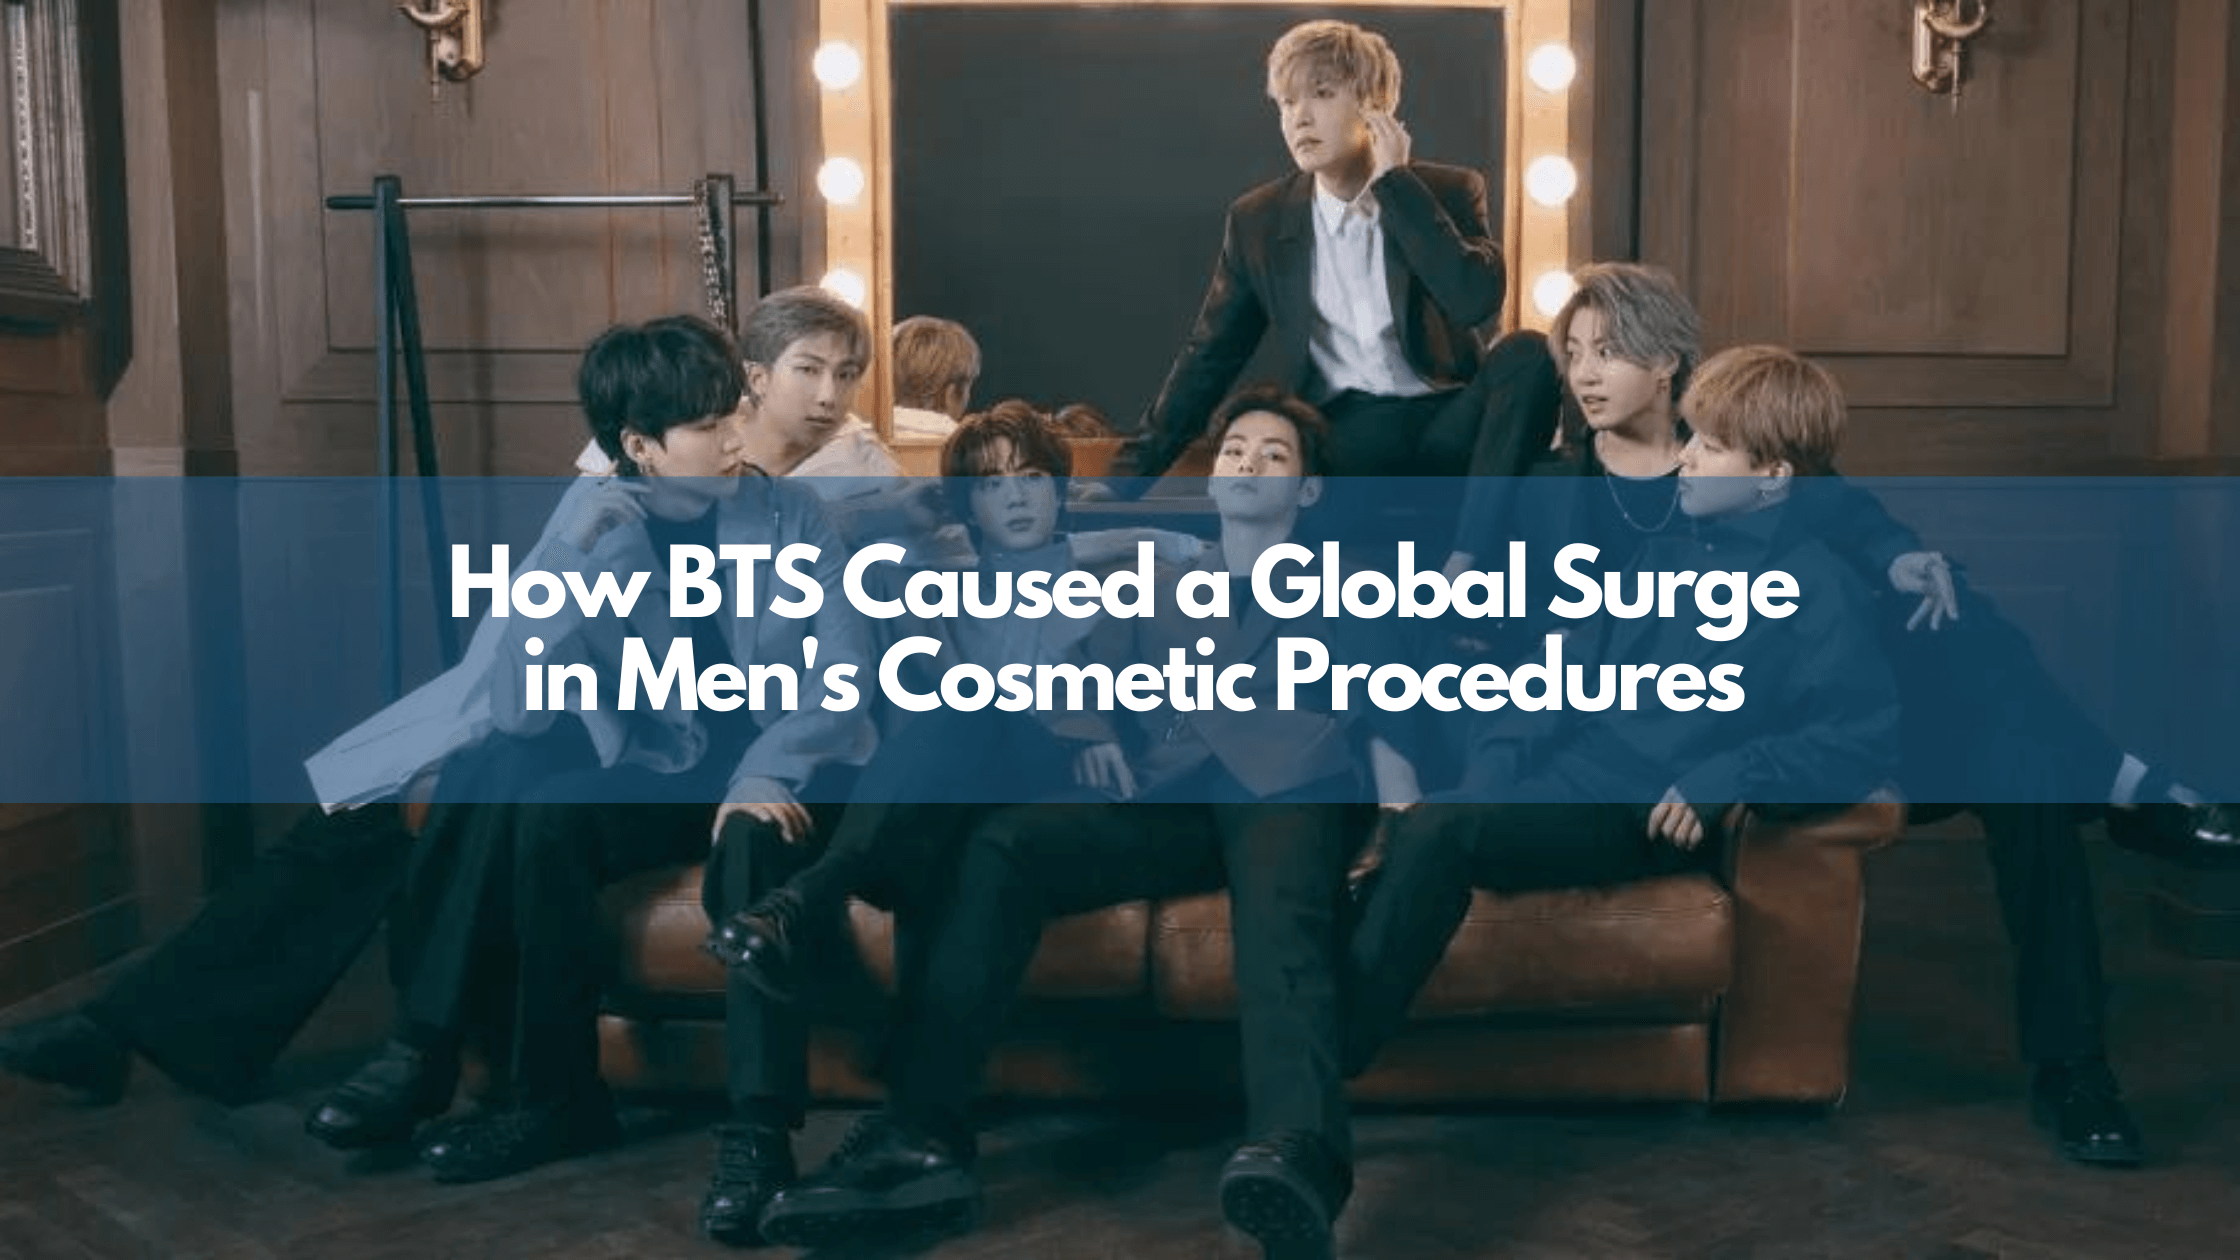 How BTS Caused a Global Surge in Men's Cosmetic Procedures